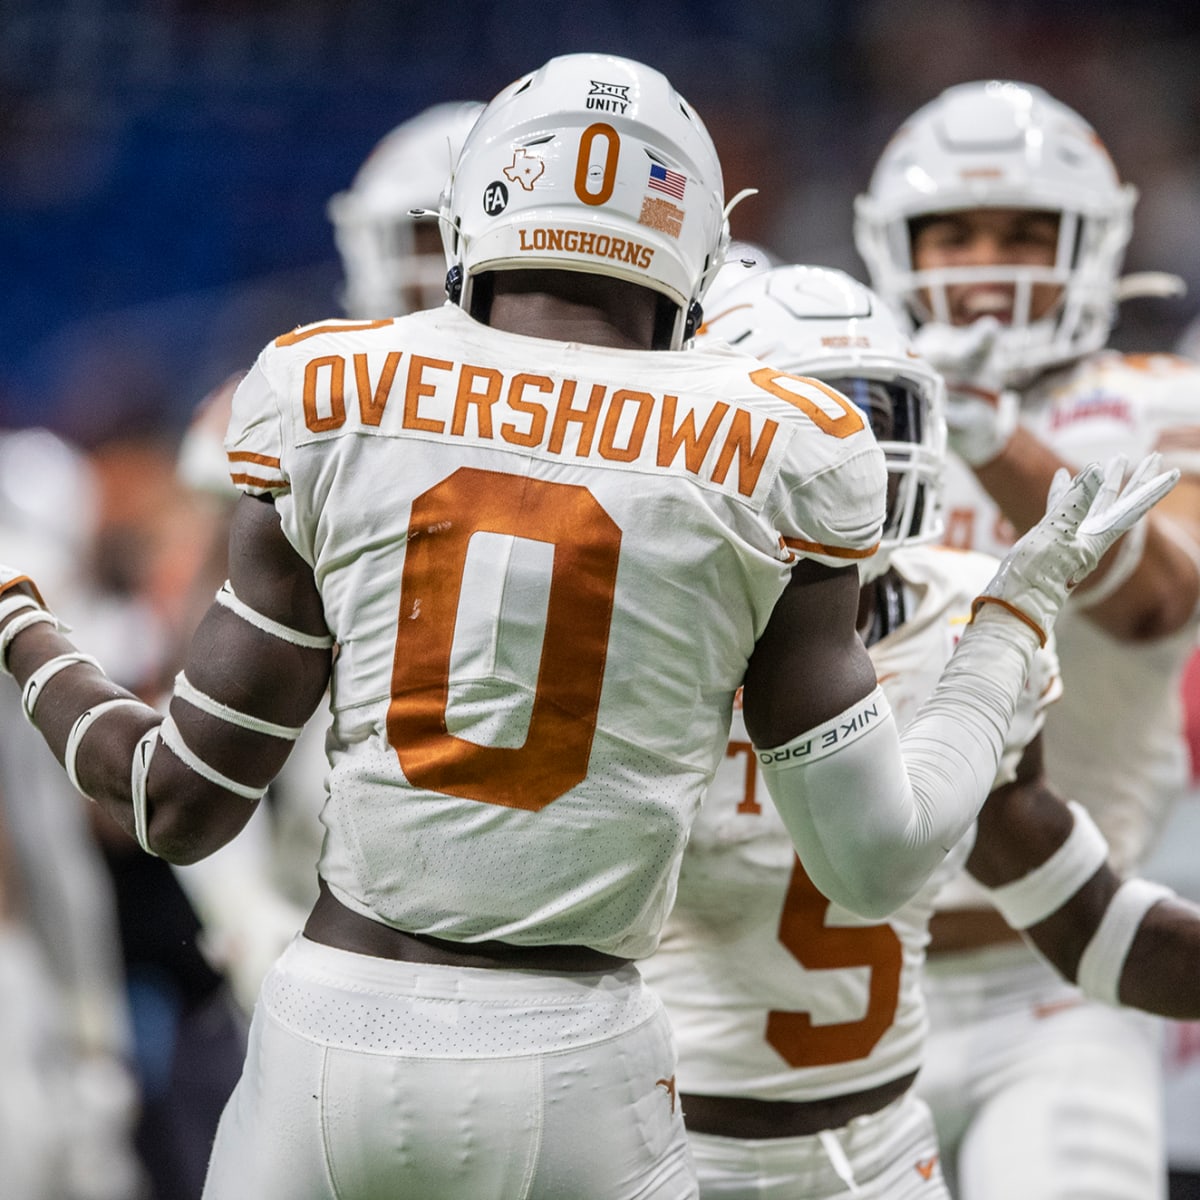 NFL Draft Profile: DeMarvion Overshown, Linebacker, Texas Longhorns - Visit  NFL Draft on Sports Illustrated, the latest news coverage, with rankings  for NFL Draft prospects, College Football, Dynasty and Devy Fantasy  Football.